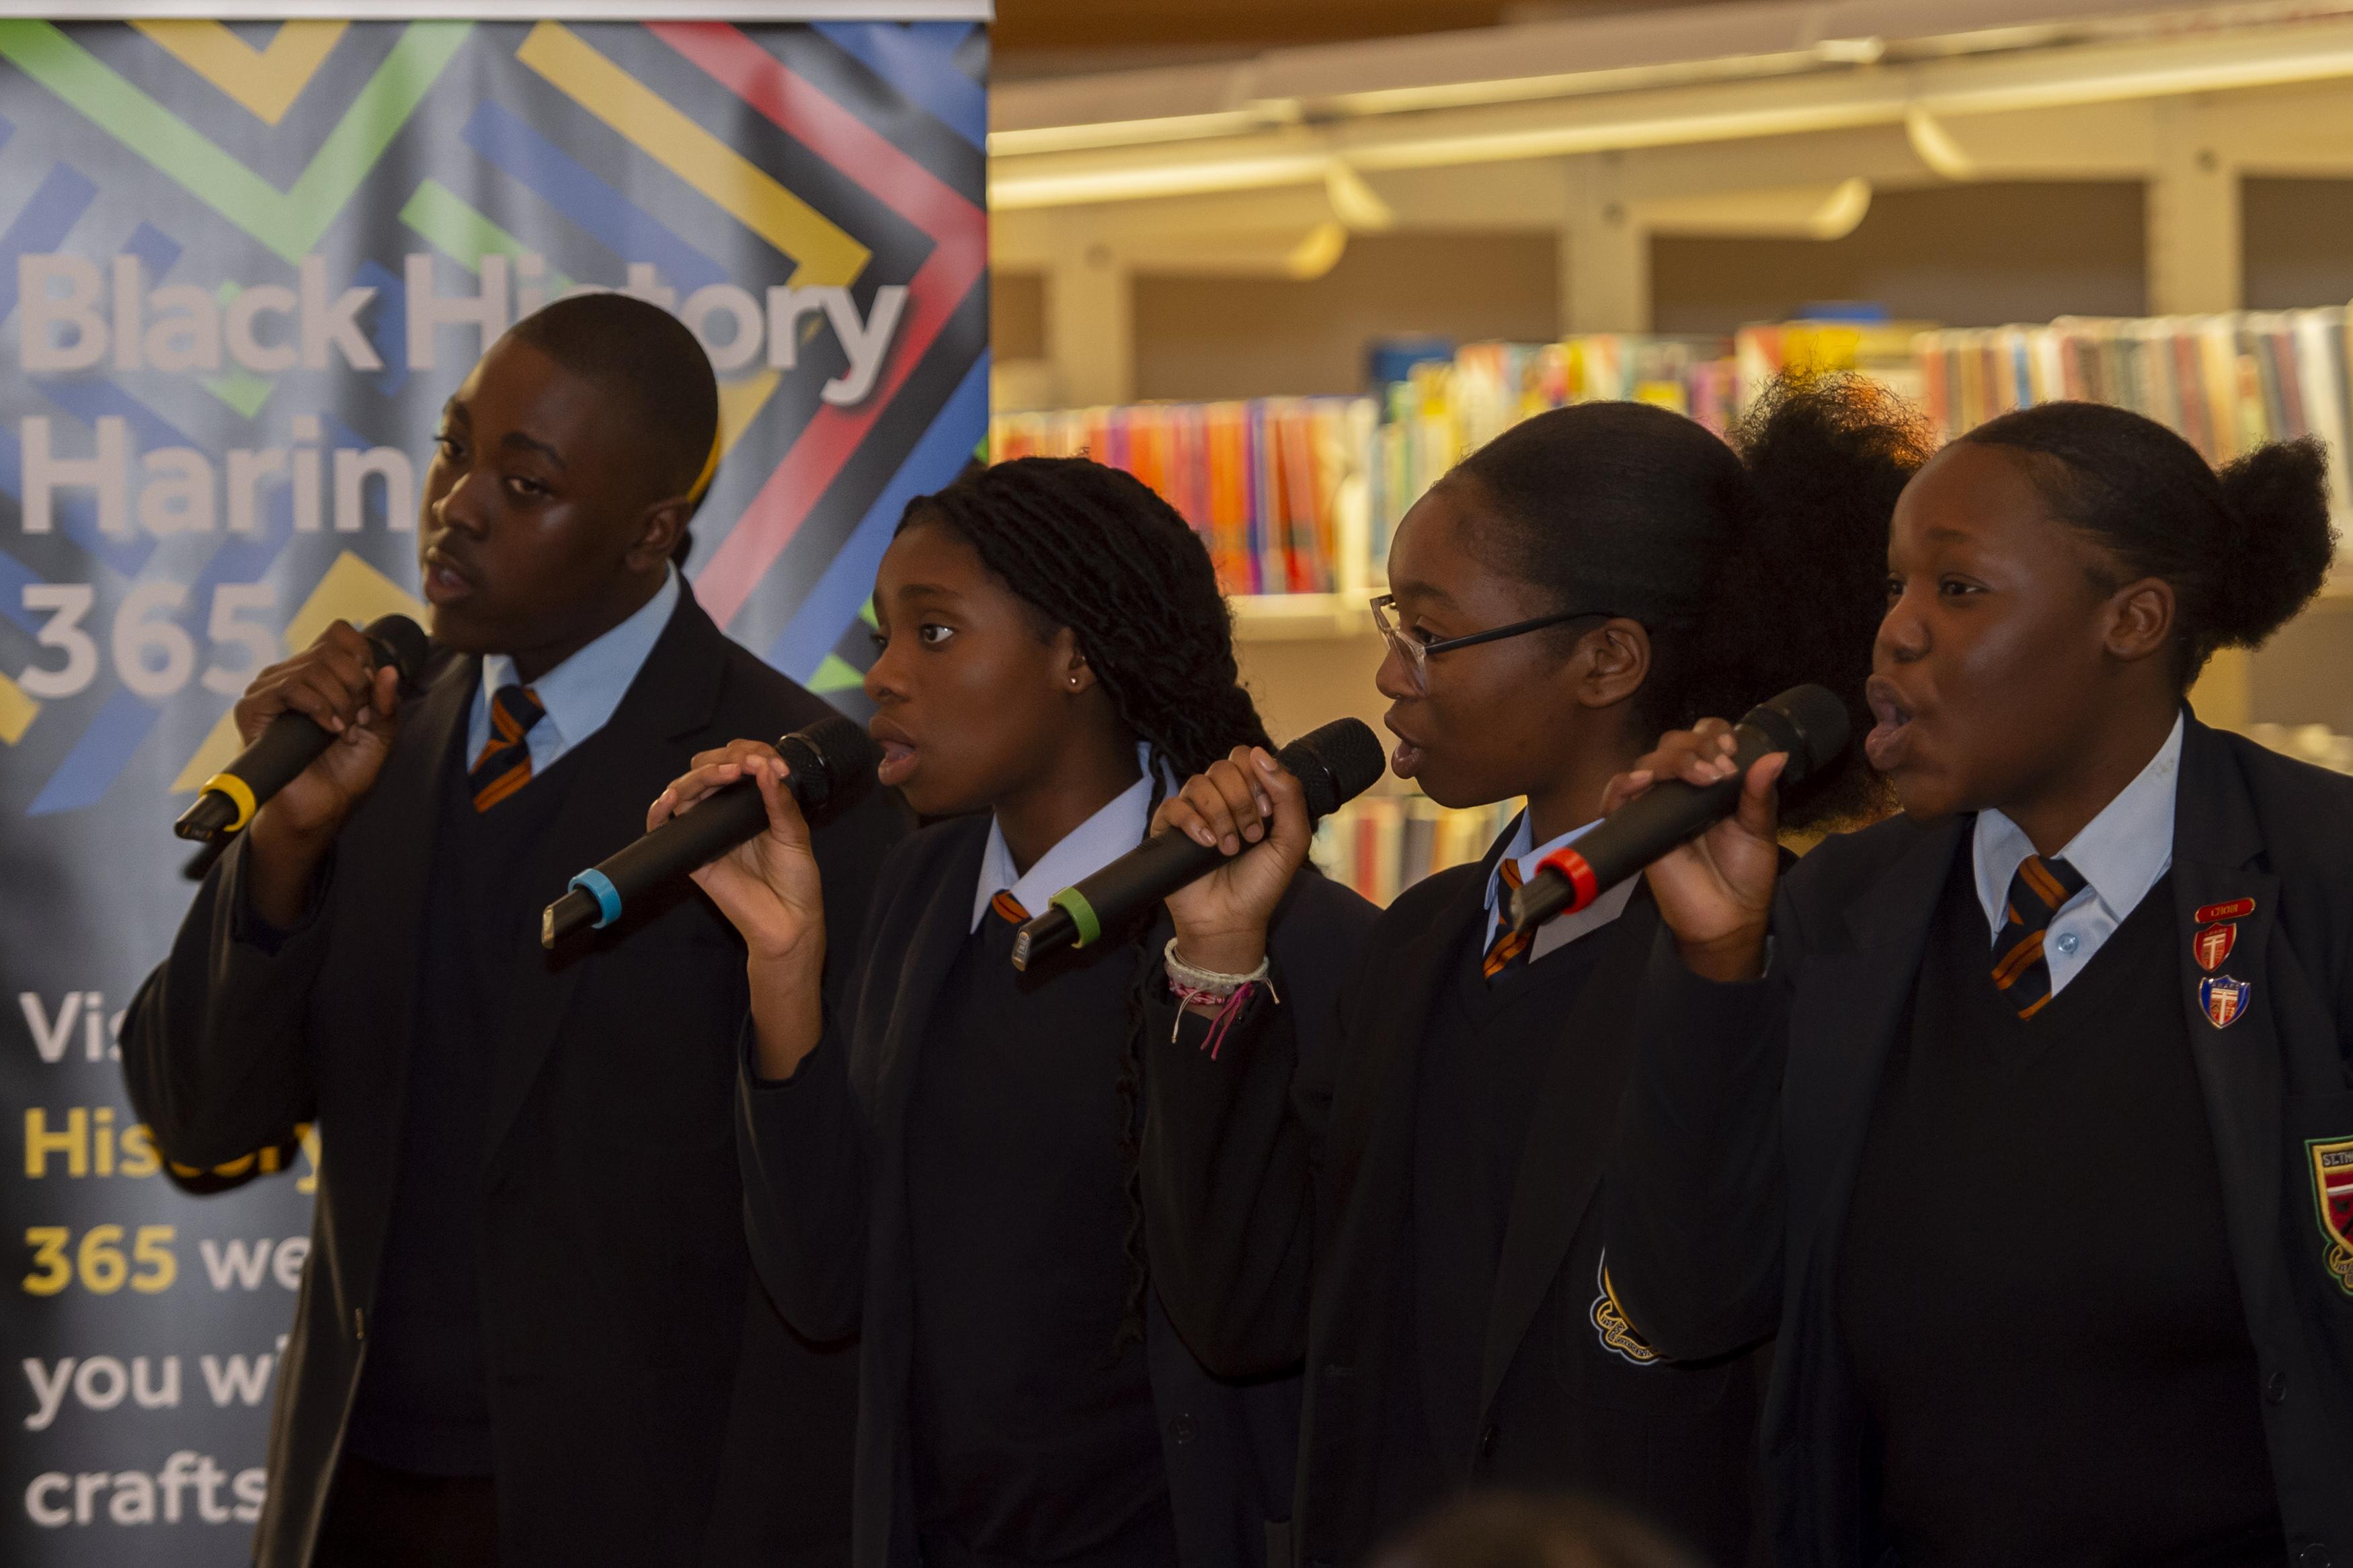 Pupils from St Thomas More Catholic School performing at our Black History Haringey launch event